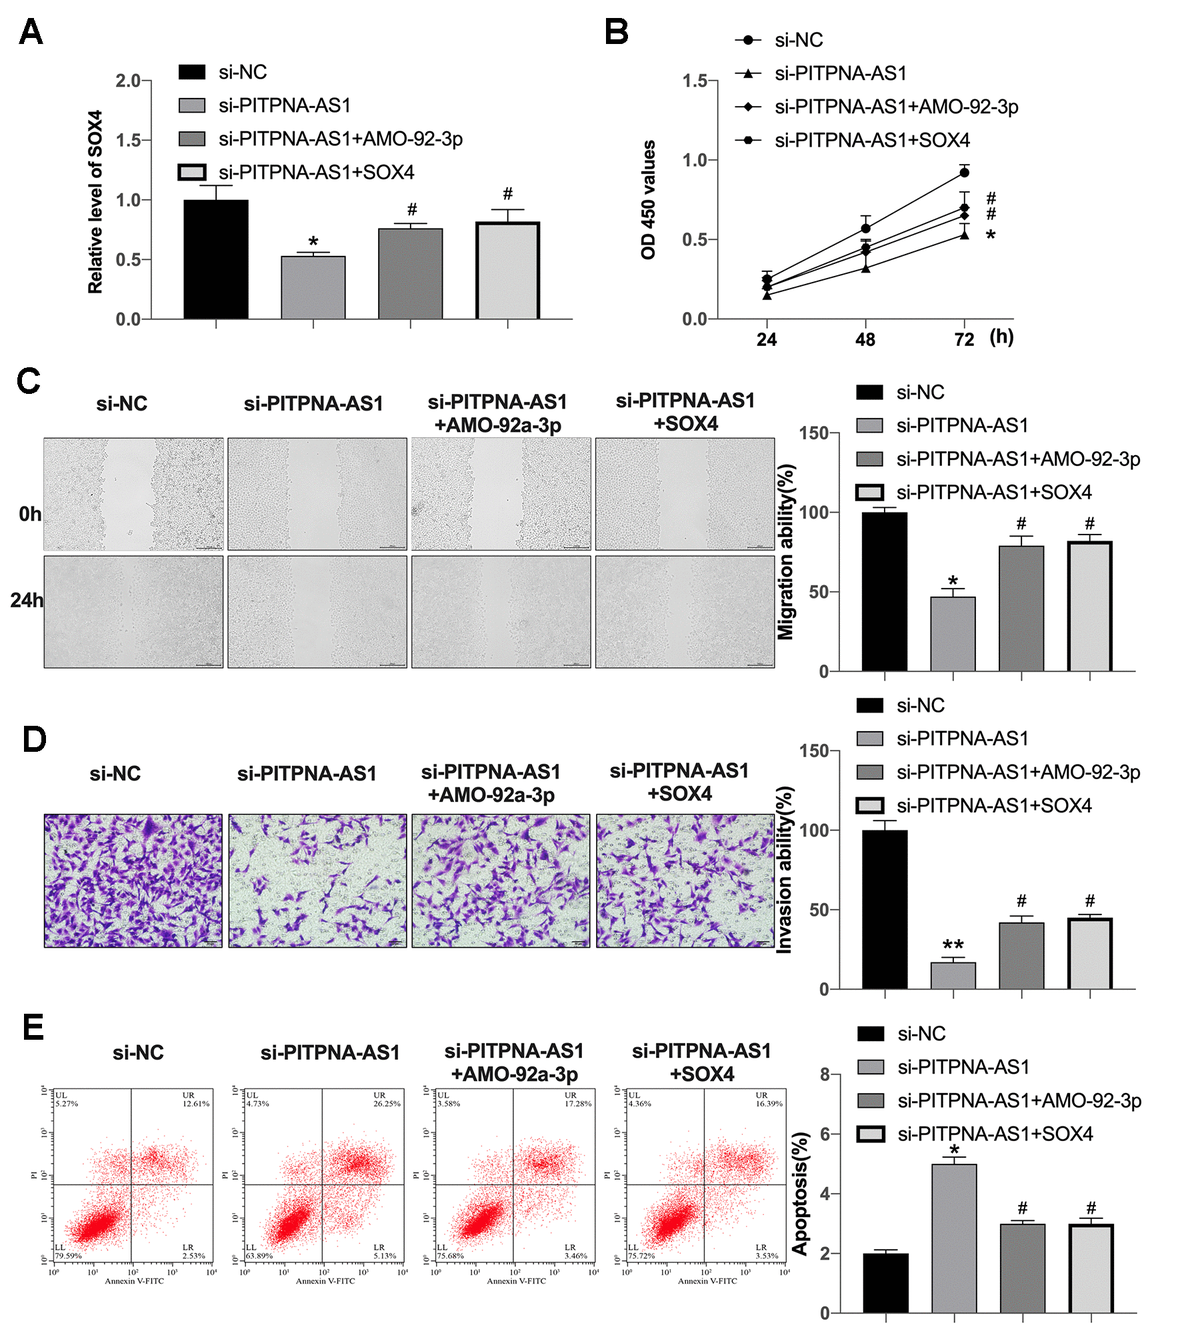 PITPNA-AS1 interacts with miR-92a-3p to regulate SOX4 expression. (A) SOX4 expression in SGC7901 cells; (B–E) cell proliferation (B), migration (C), invasion (D), and apoptosis (E) in SGC7901 cells containing si-PITPNA-AS1, miR-92a-3p mimic, and SOX4 vector. Data are presented as mean ± SEM. Statistic significant differences were indicated: ** P #P 